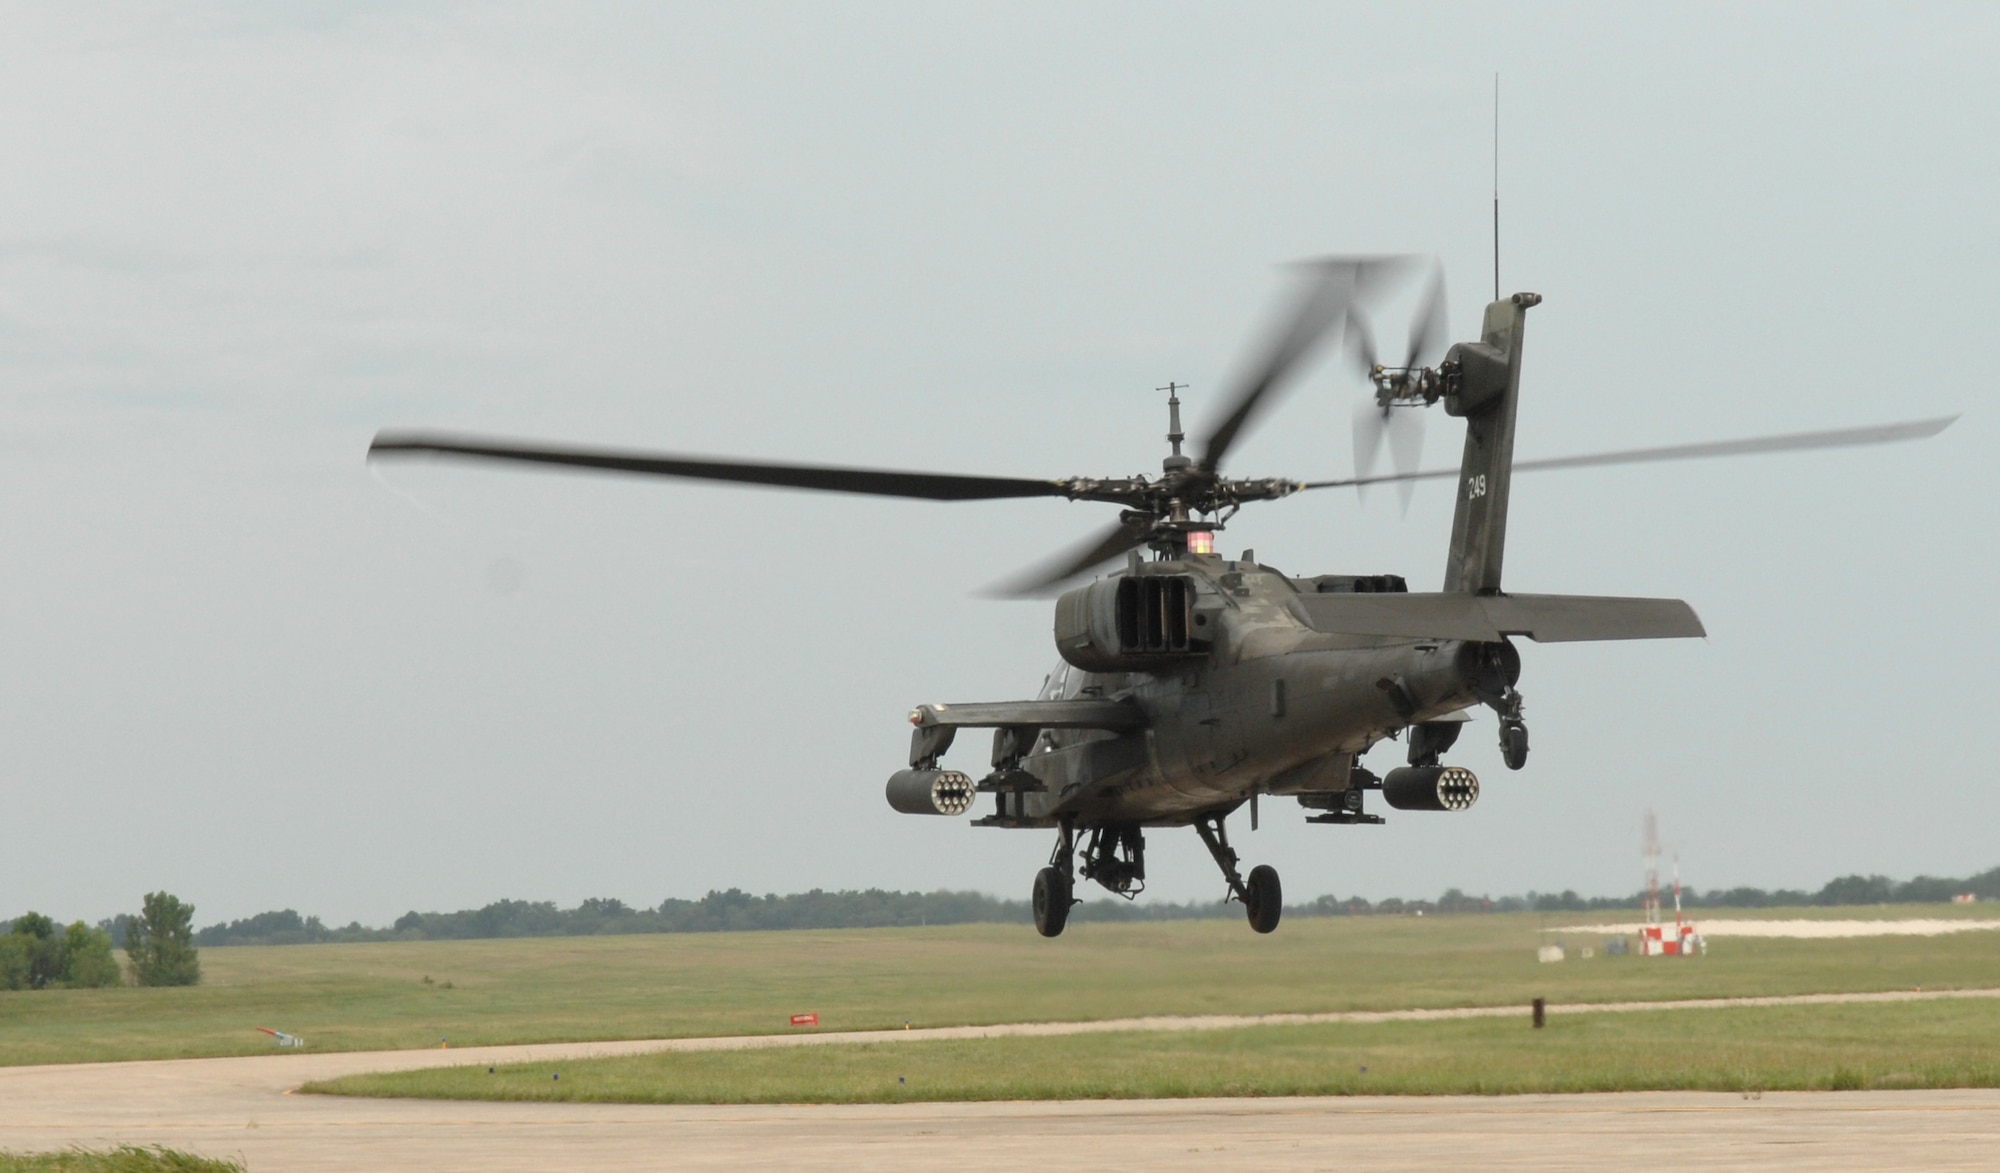 WHITEMAN AIR FORCE BASE, Mo. – AH-64A Apache takes off after being loaded to fire its munitions at Ft. Leonard Wood Sept. 6. The Missouri Army National Guard’s 1-135th Attack Recon Battalion recently implemented a new training program that allows pilots to arm and fly three AH-64 Apache helicopters from Whiteman AFB to Fort Leonard Wood for the first time to practice aerial gunnery at their monthly drill. (U.S. Air Force photo/Senior Airman Stephen Linch)